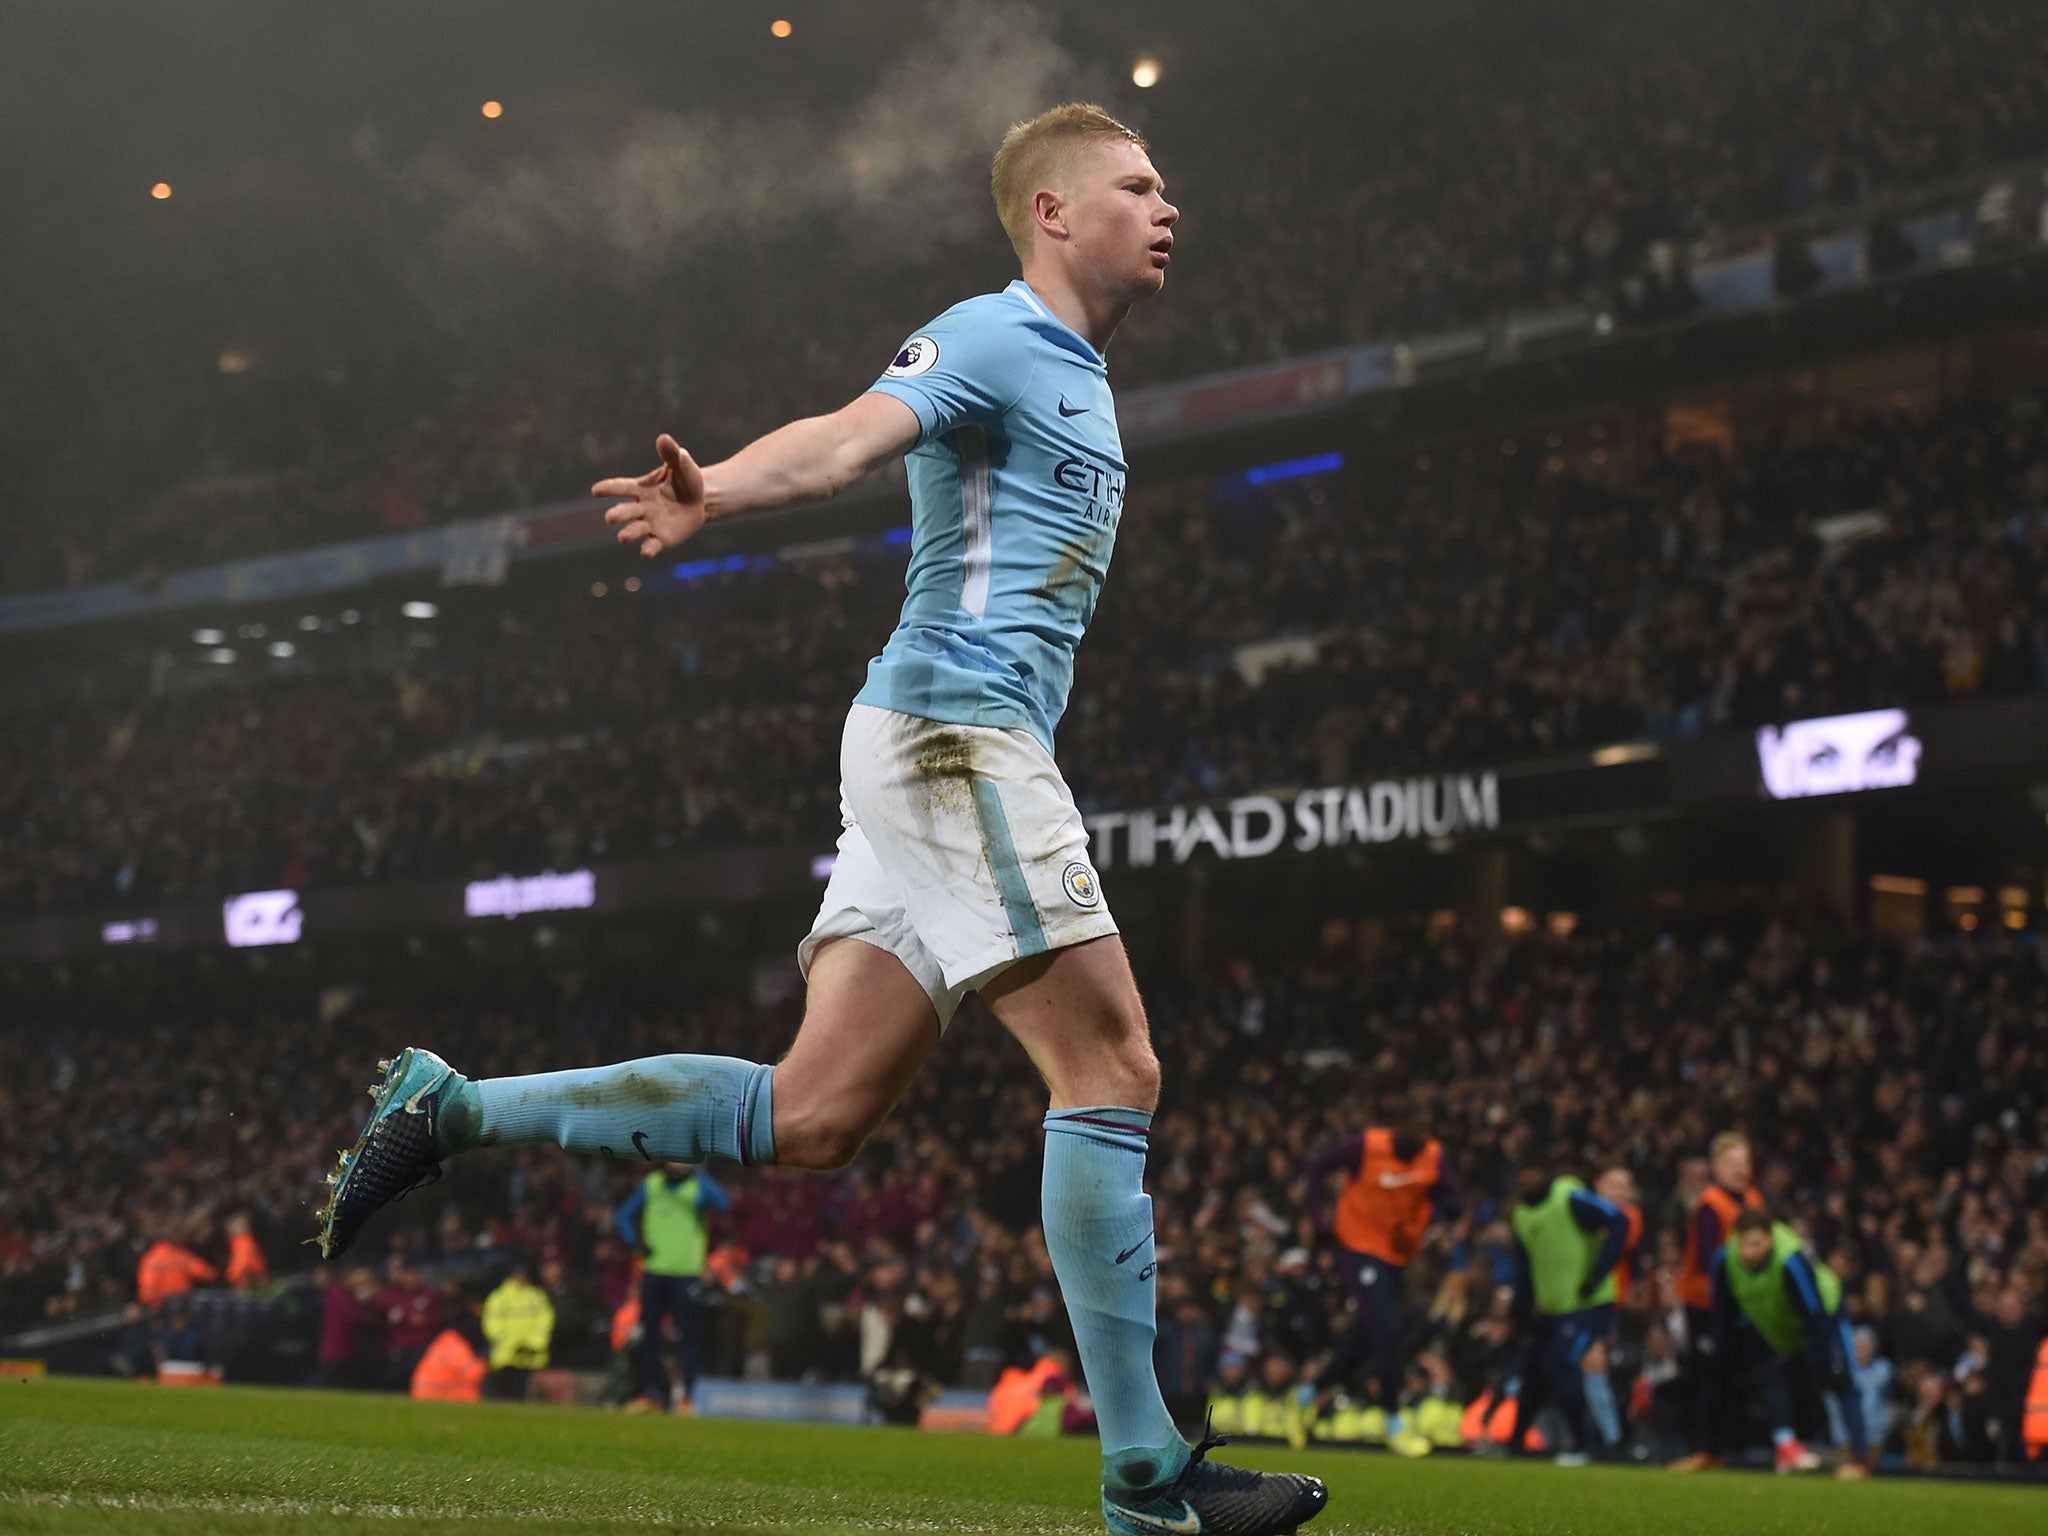 Kevin de Bruyne doubled City's lead with a sublime close-range strike